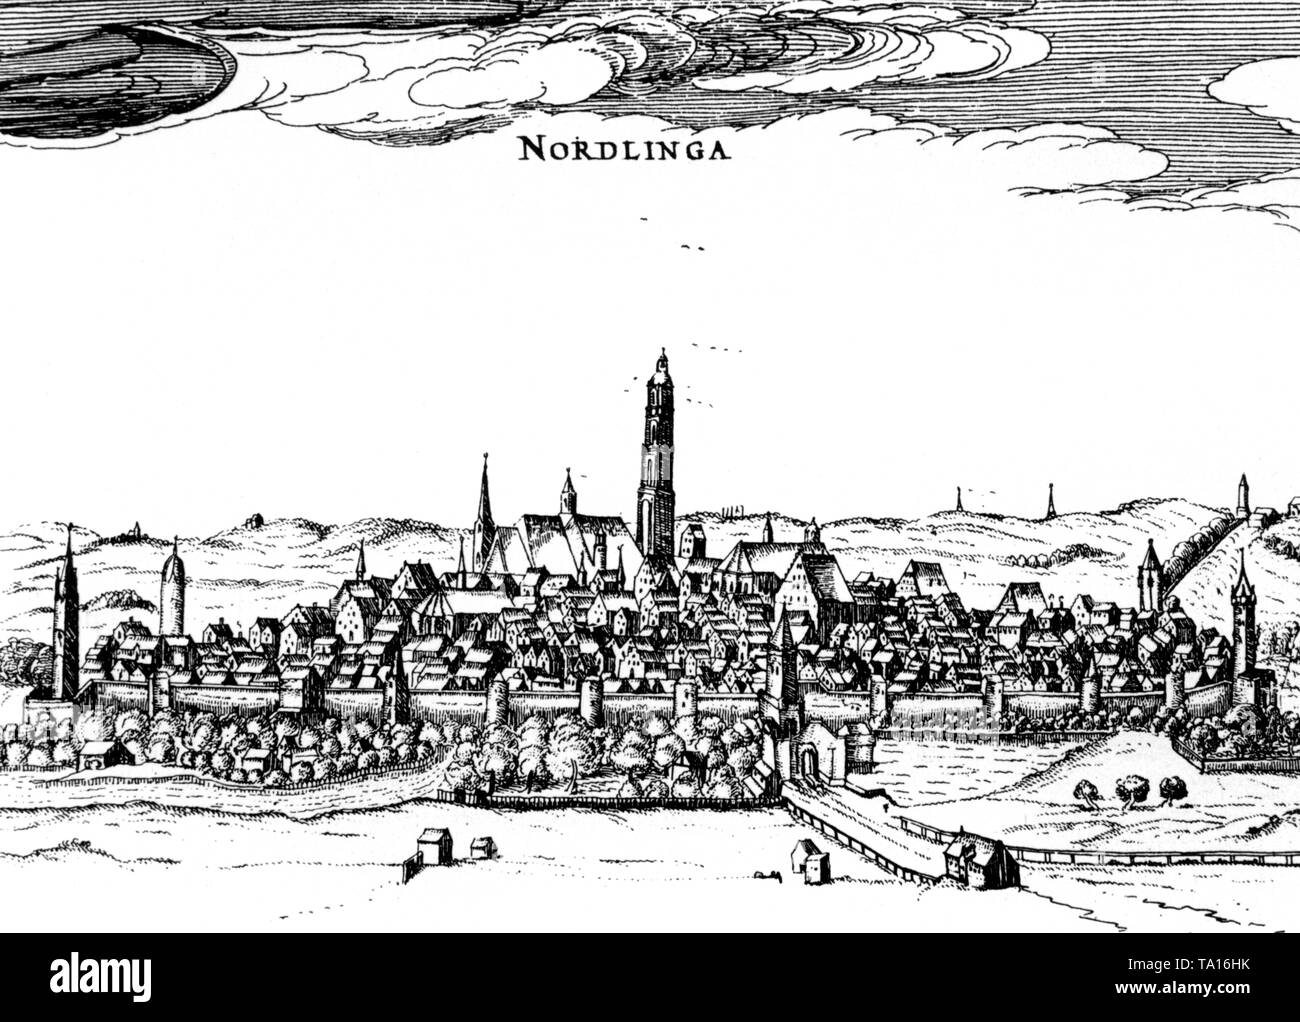 Copper engraving by Petrus Bertius of the then free imperial city of 'Nordlinga'. Stock Photo